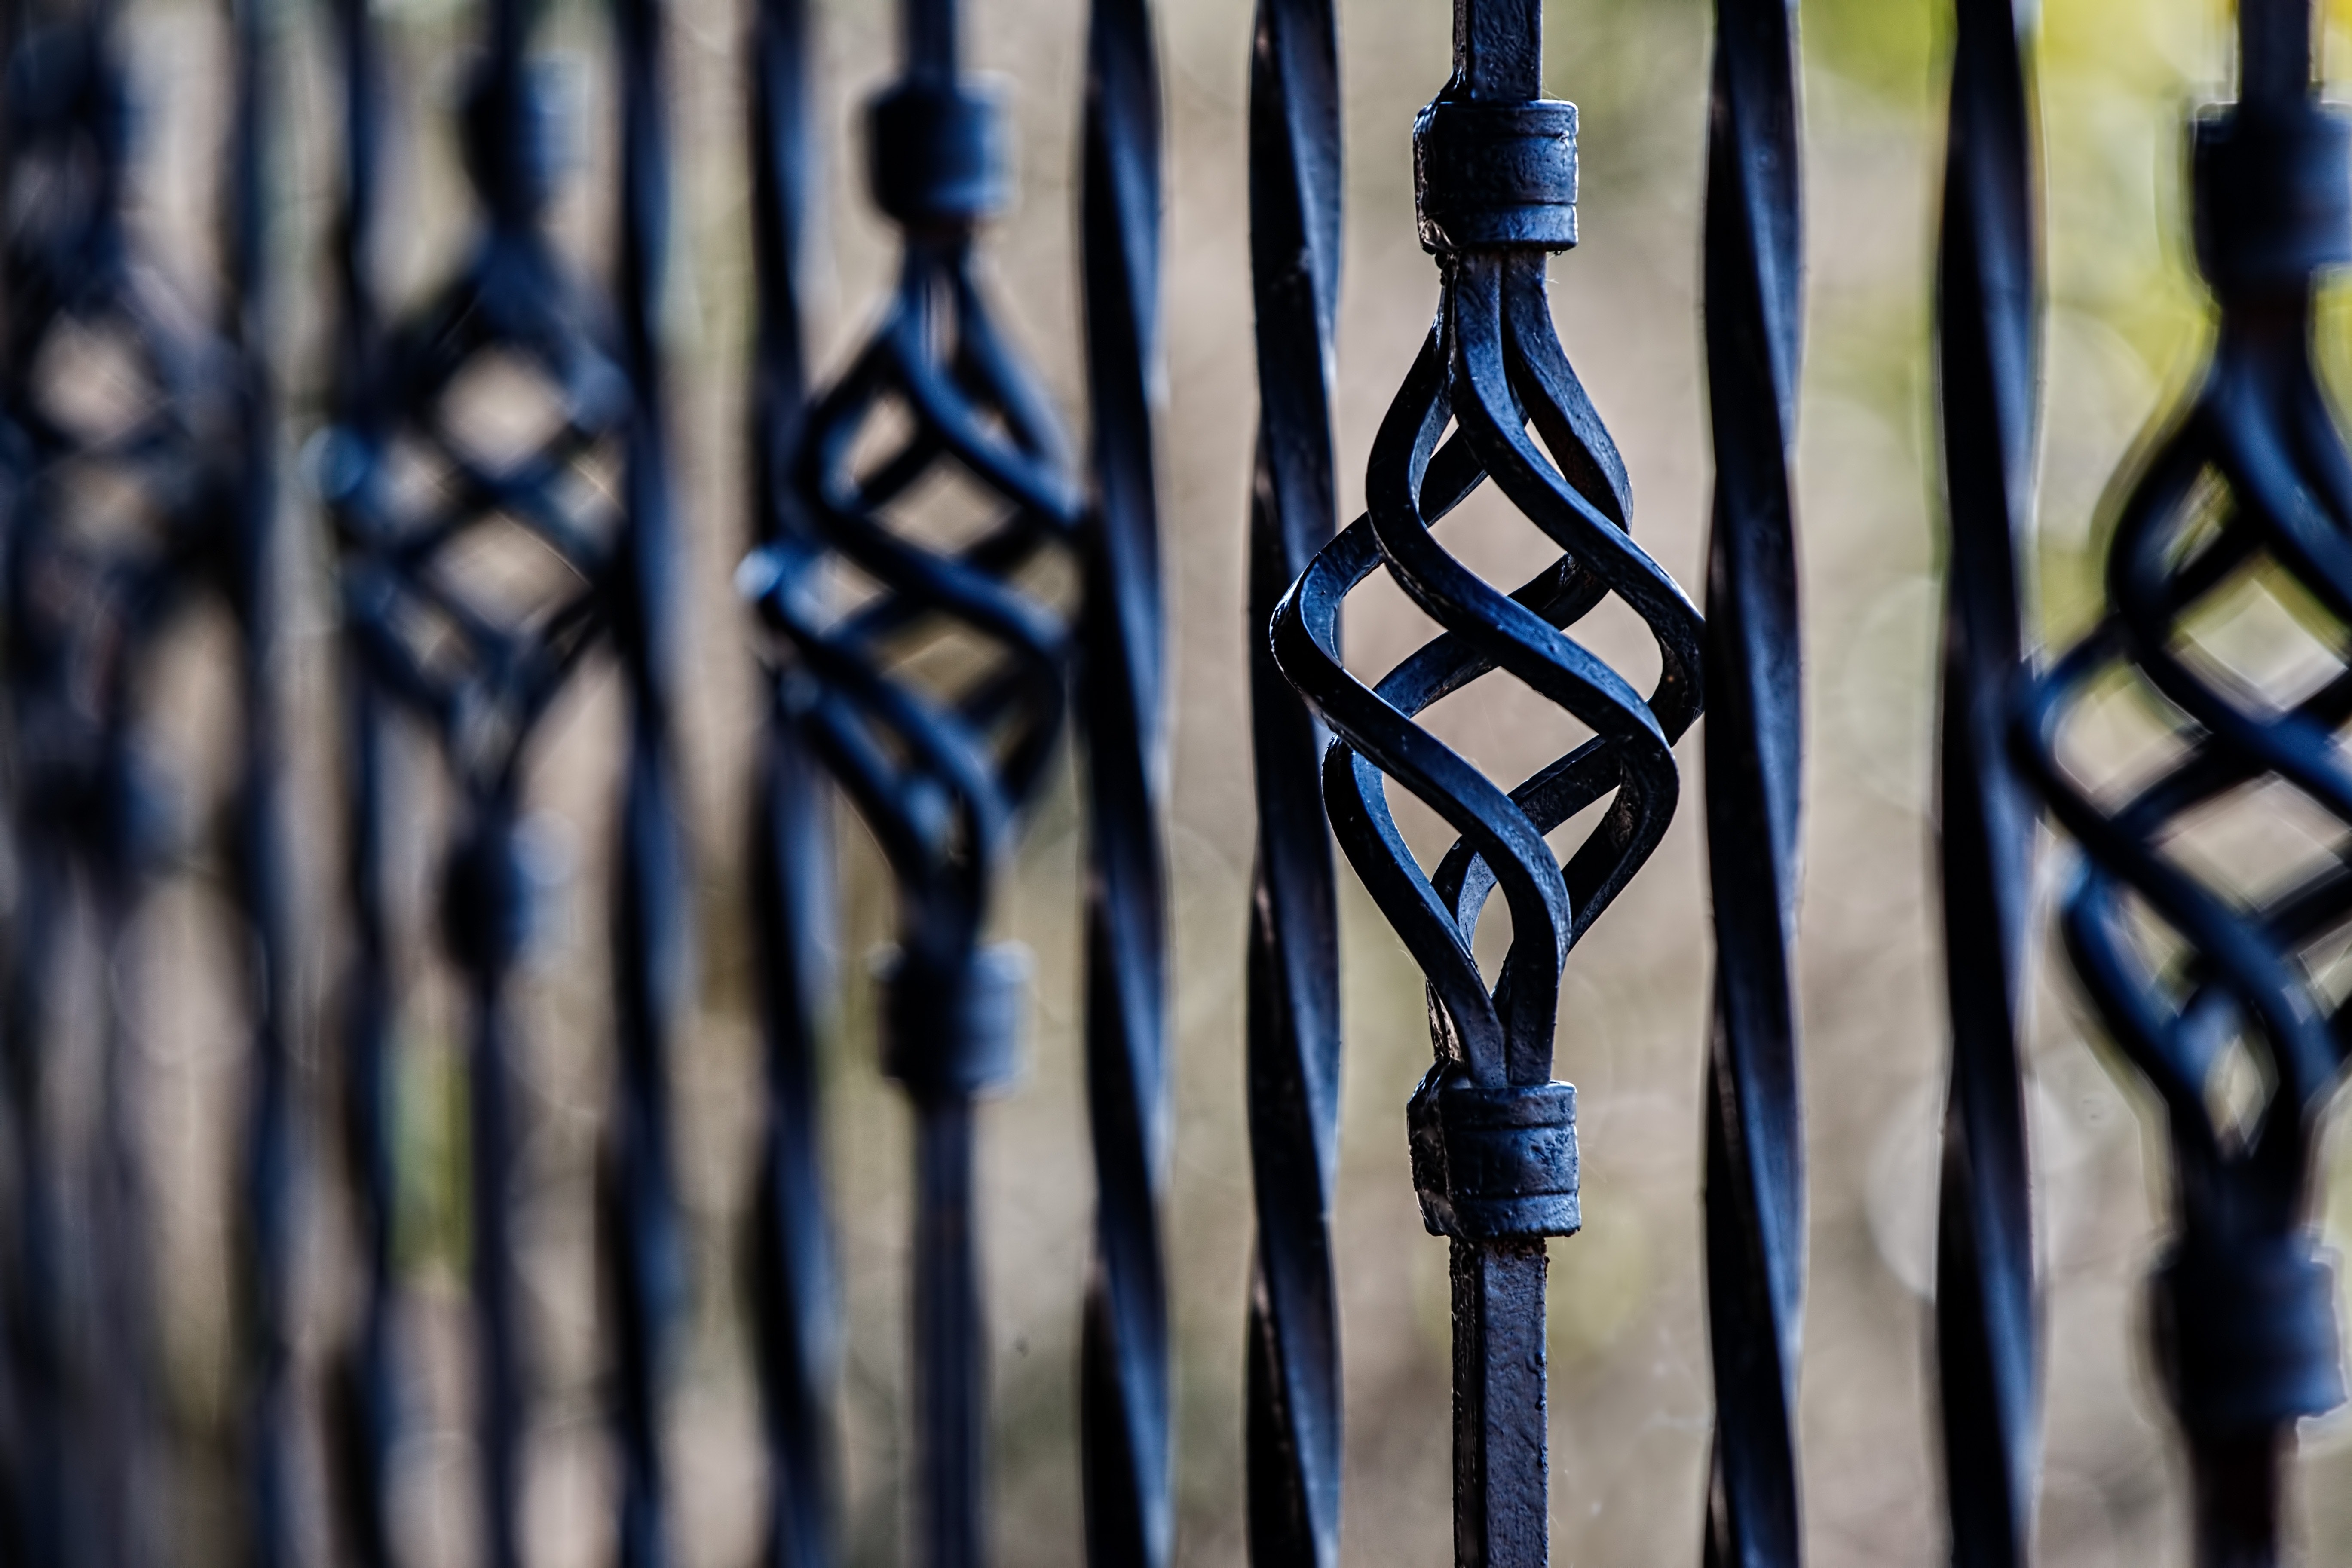 Black Steel Fence during Daytime · Free Stock Photo